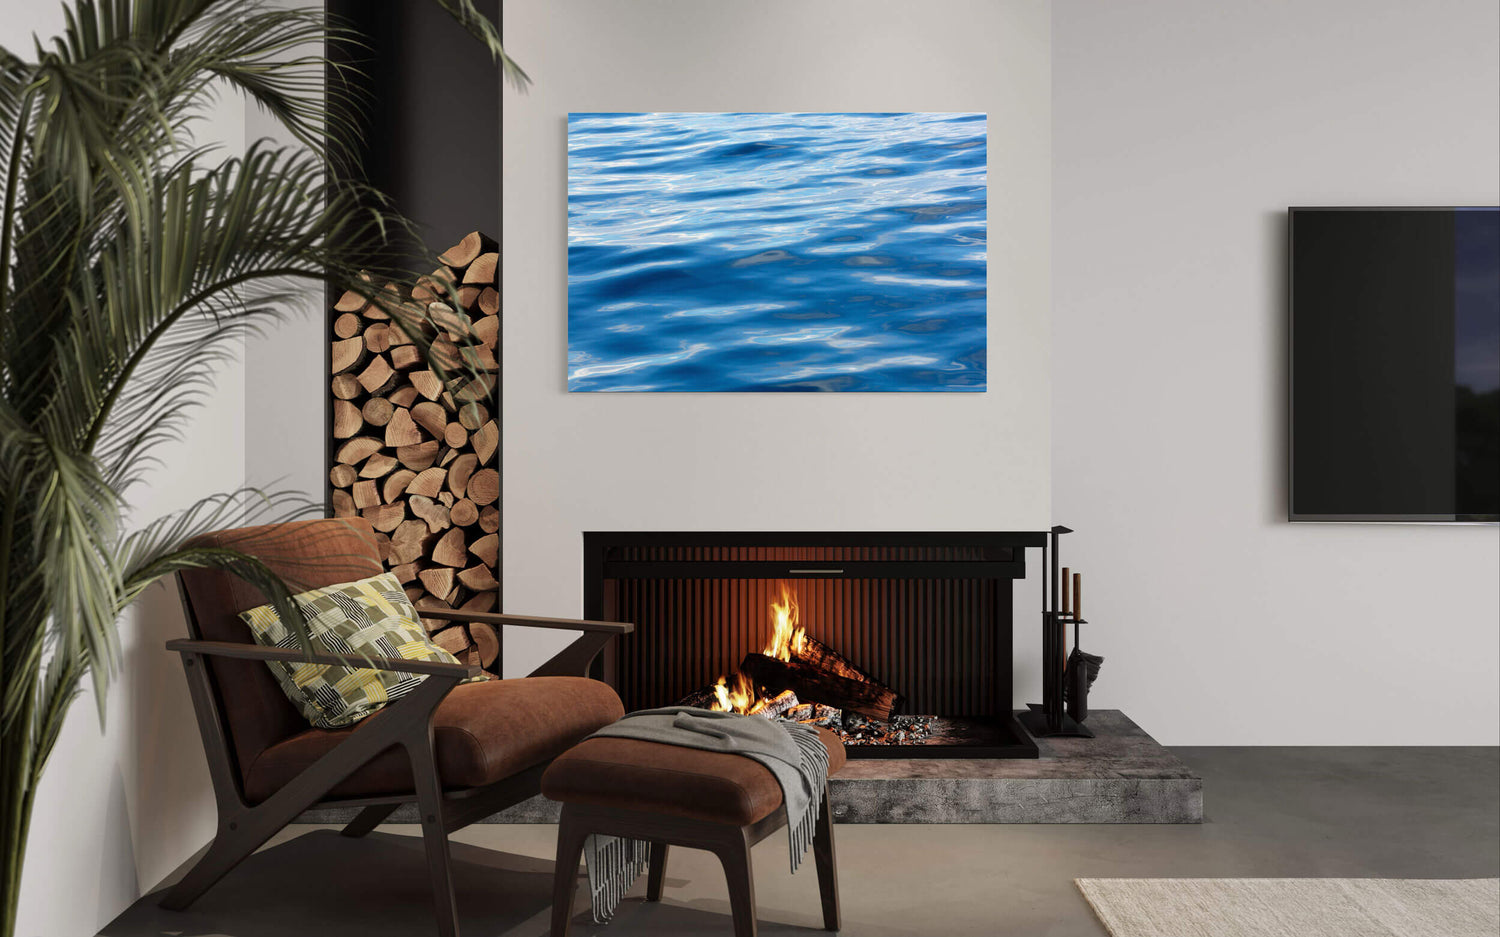 A piece of abstract water art showing a picture from an Anacortes whale watching tour hangs in a living room.